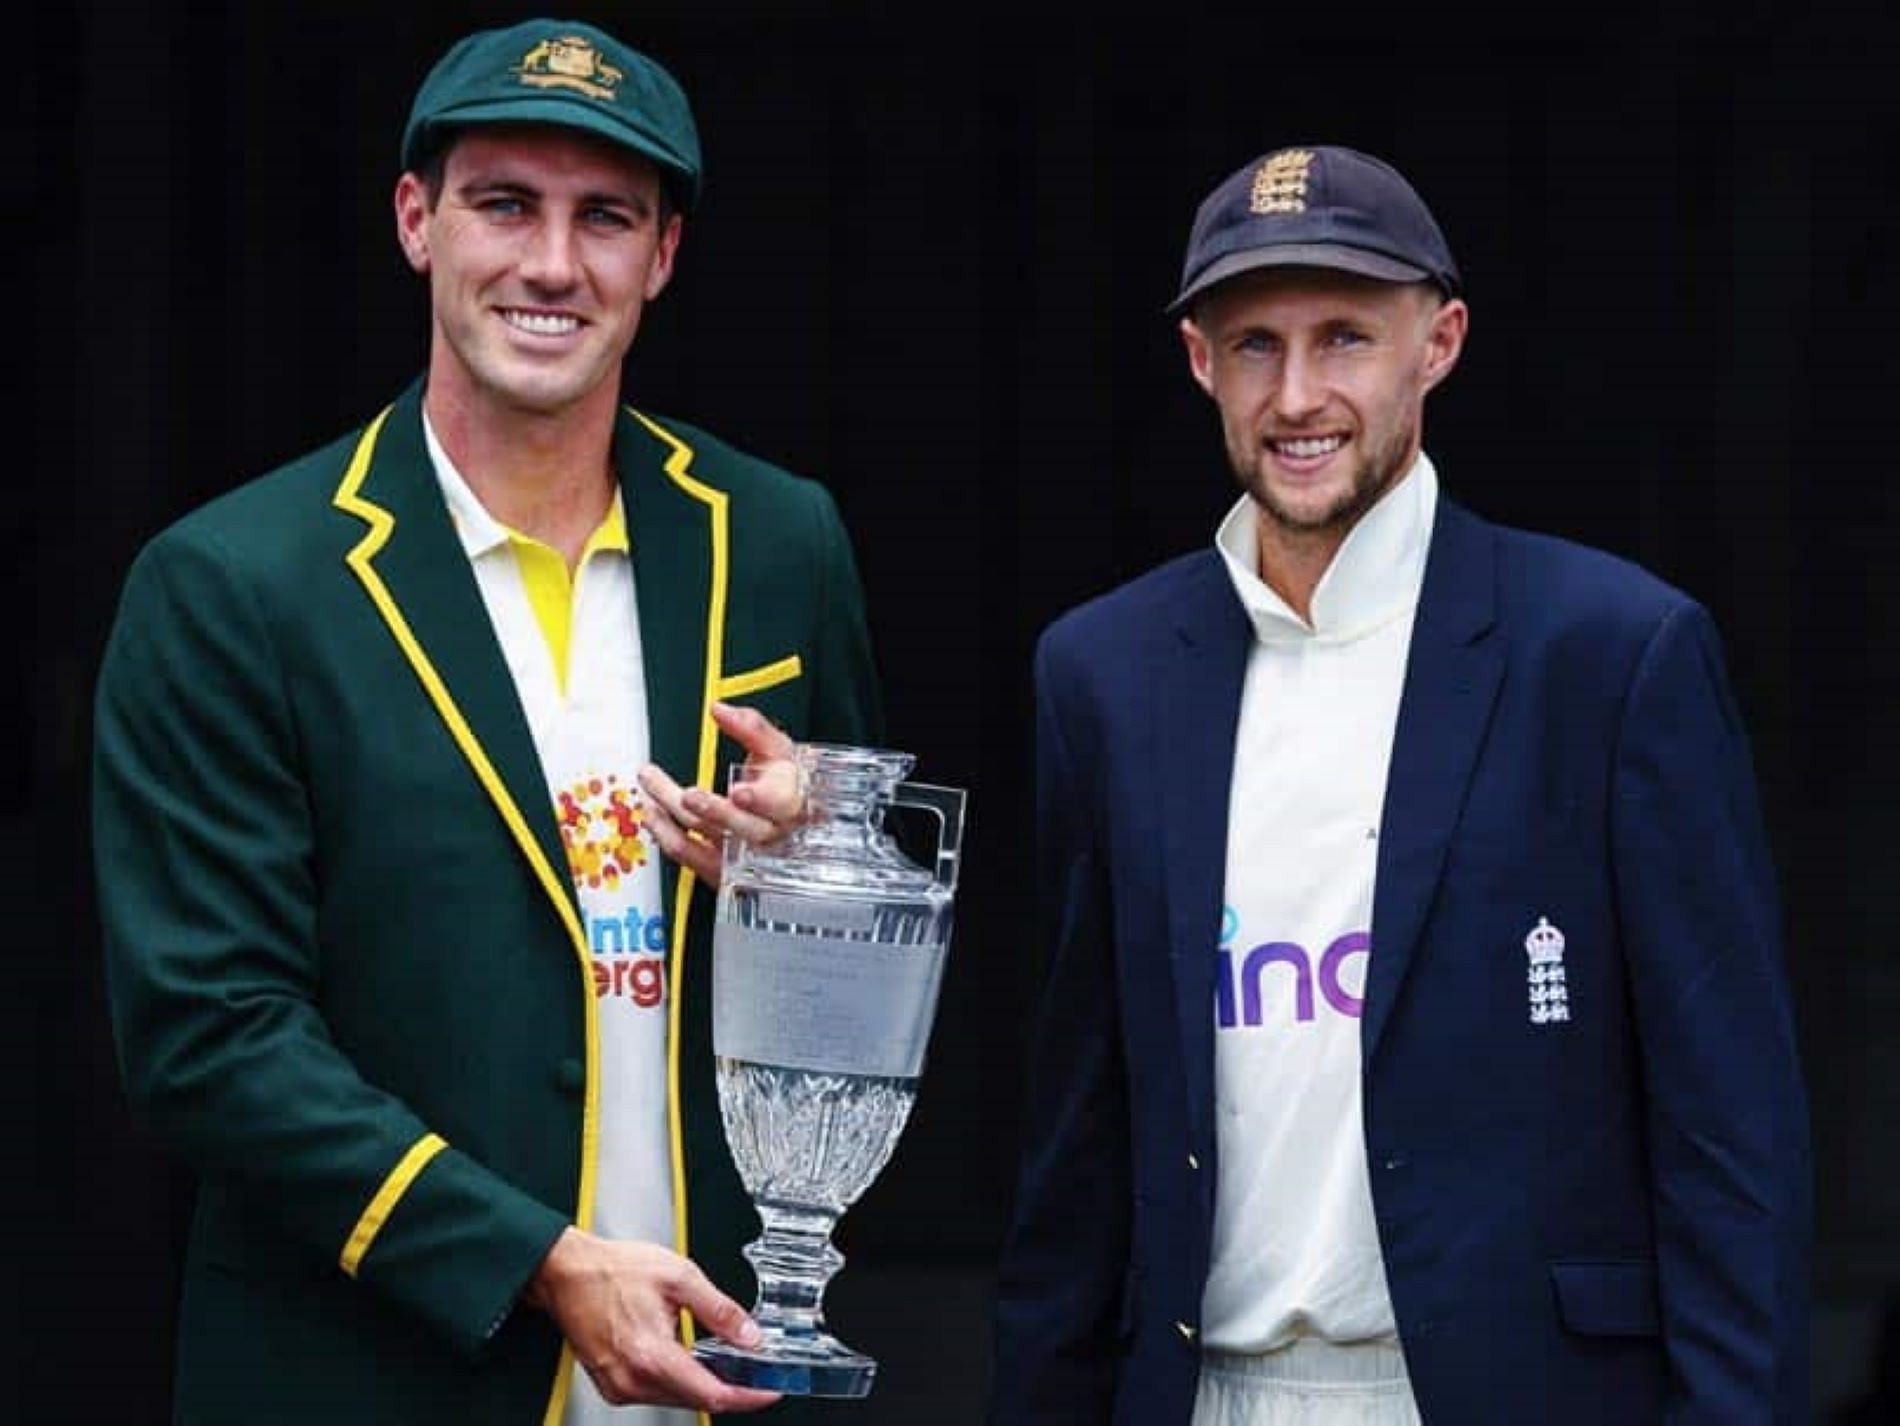 Pat Cummins and Joe Root will play key roles in the upcoming Ashes series